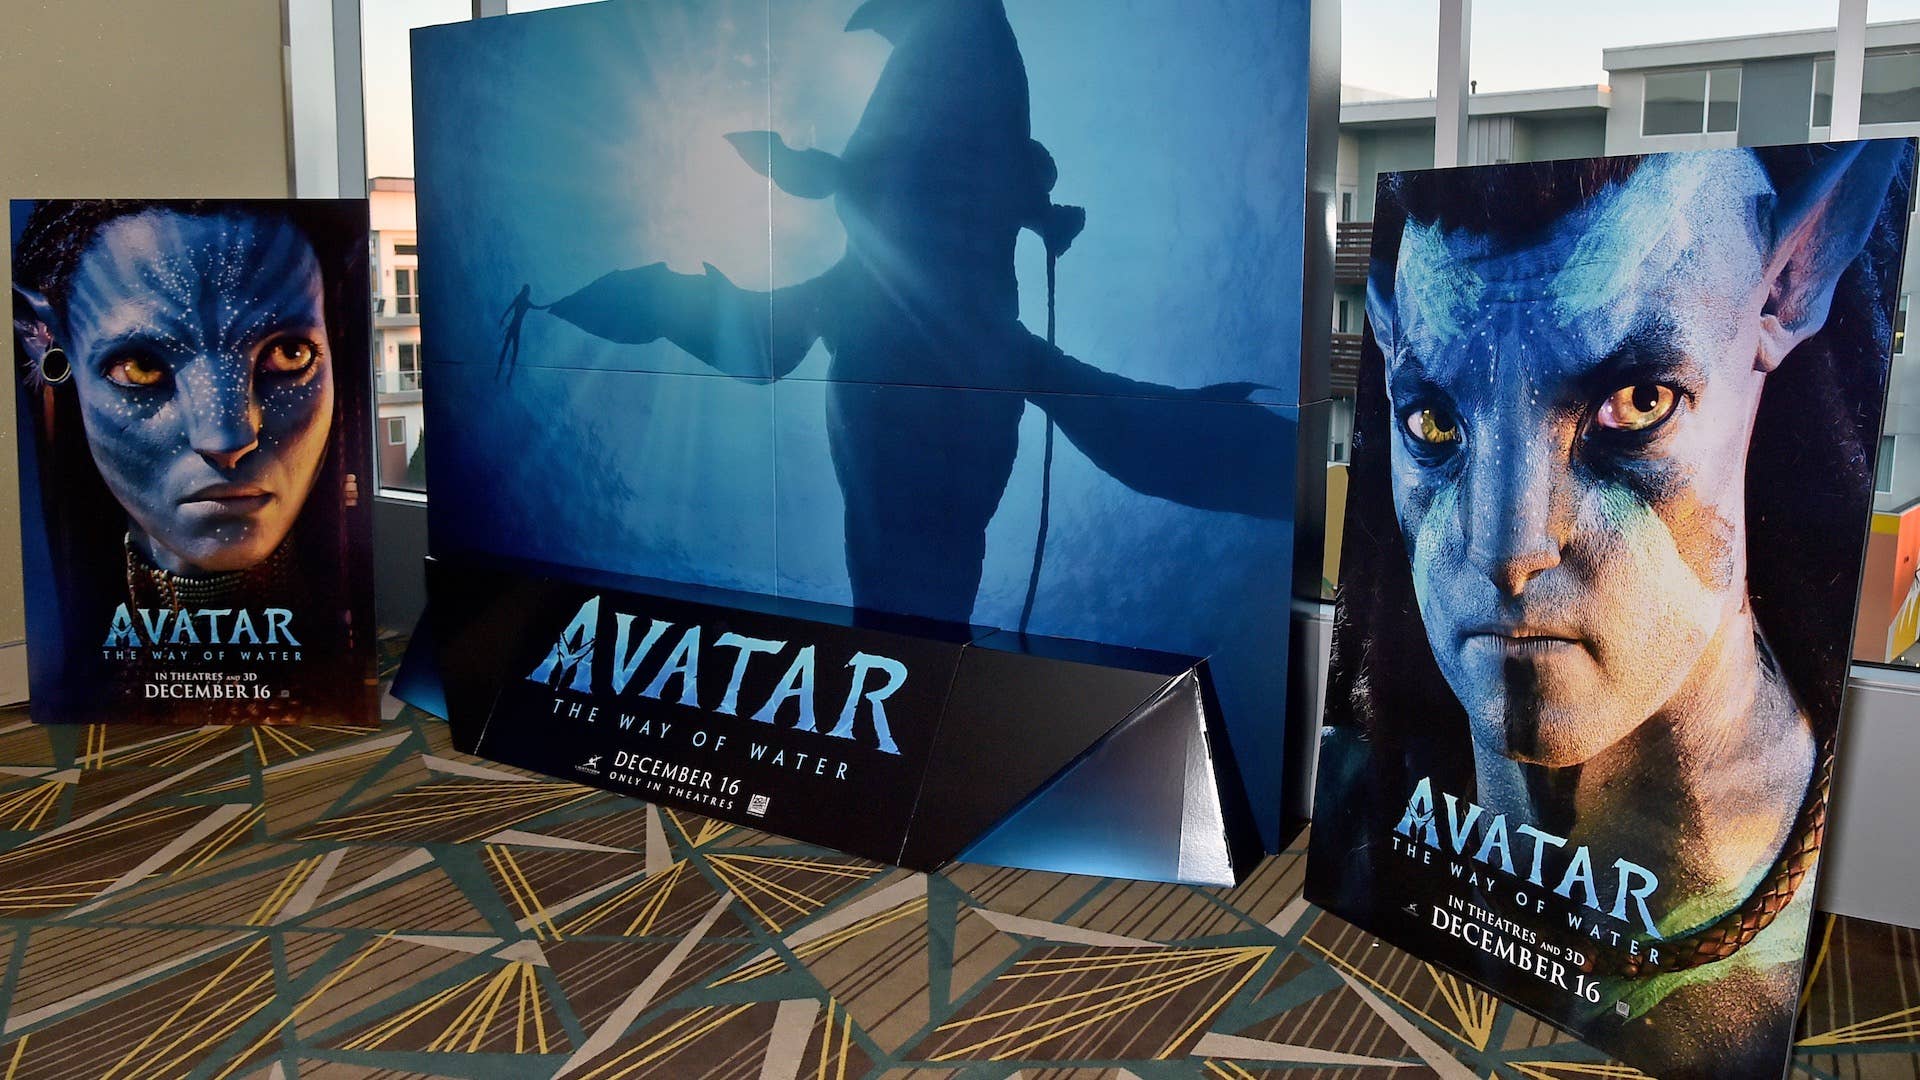 Signage is seen during the “Avatar: The Way of Water”